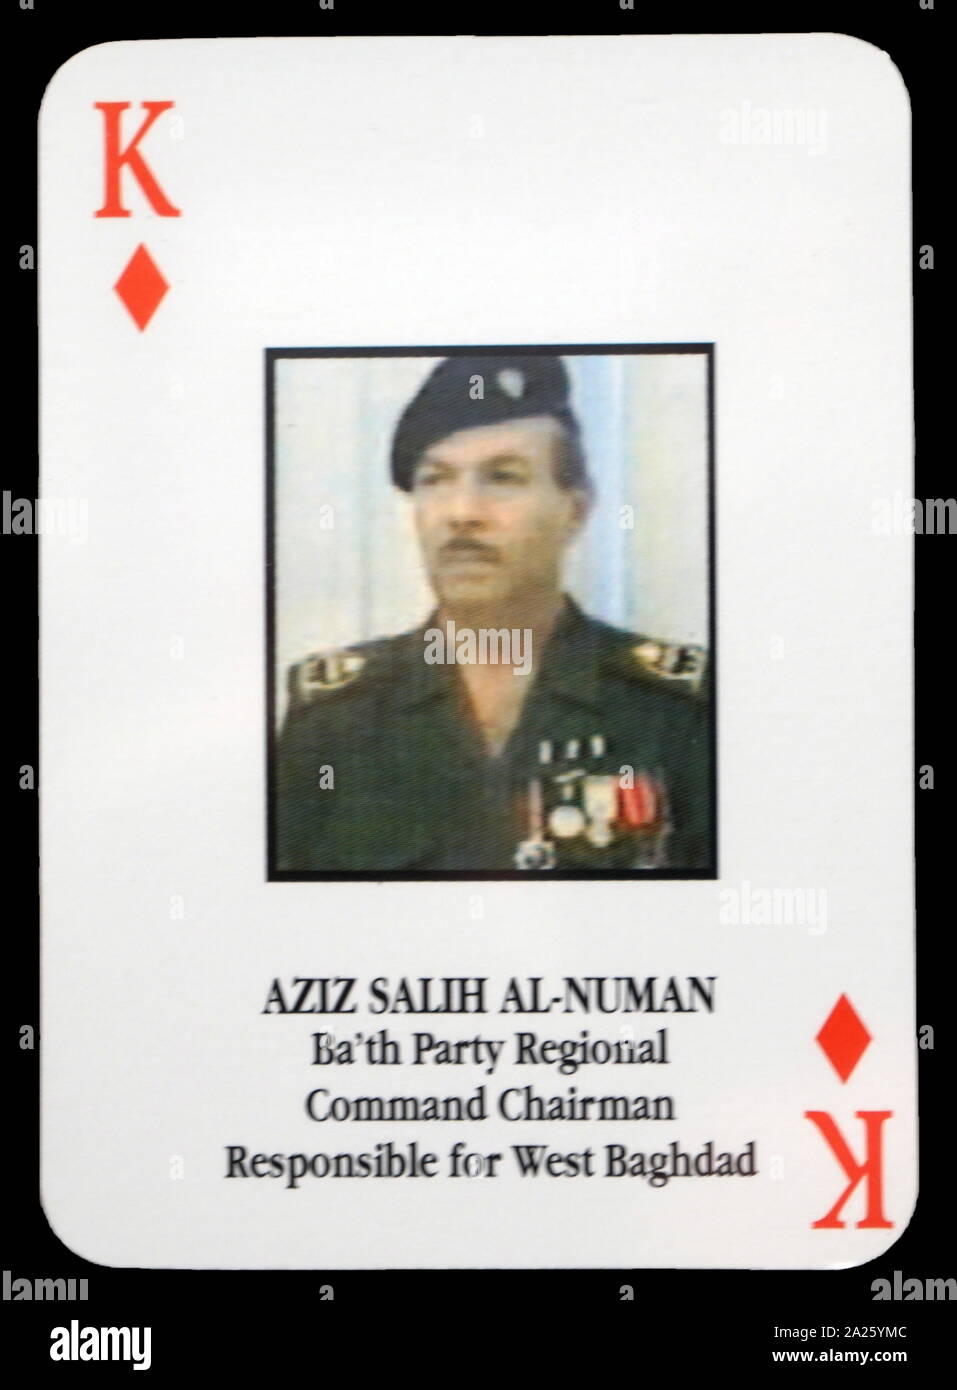 Most-wanted Iraqi playing cards - Aziz Salih Al-Numan (Ba'th Party Regional Command Chairman Responsible for West Baghdad). The U.S. military developed a set of playing cards to help troop identify the most-wanted members of President Saddam Hussein's government during the 2003 invasion of Iraq. Stock Photo